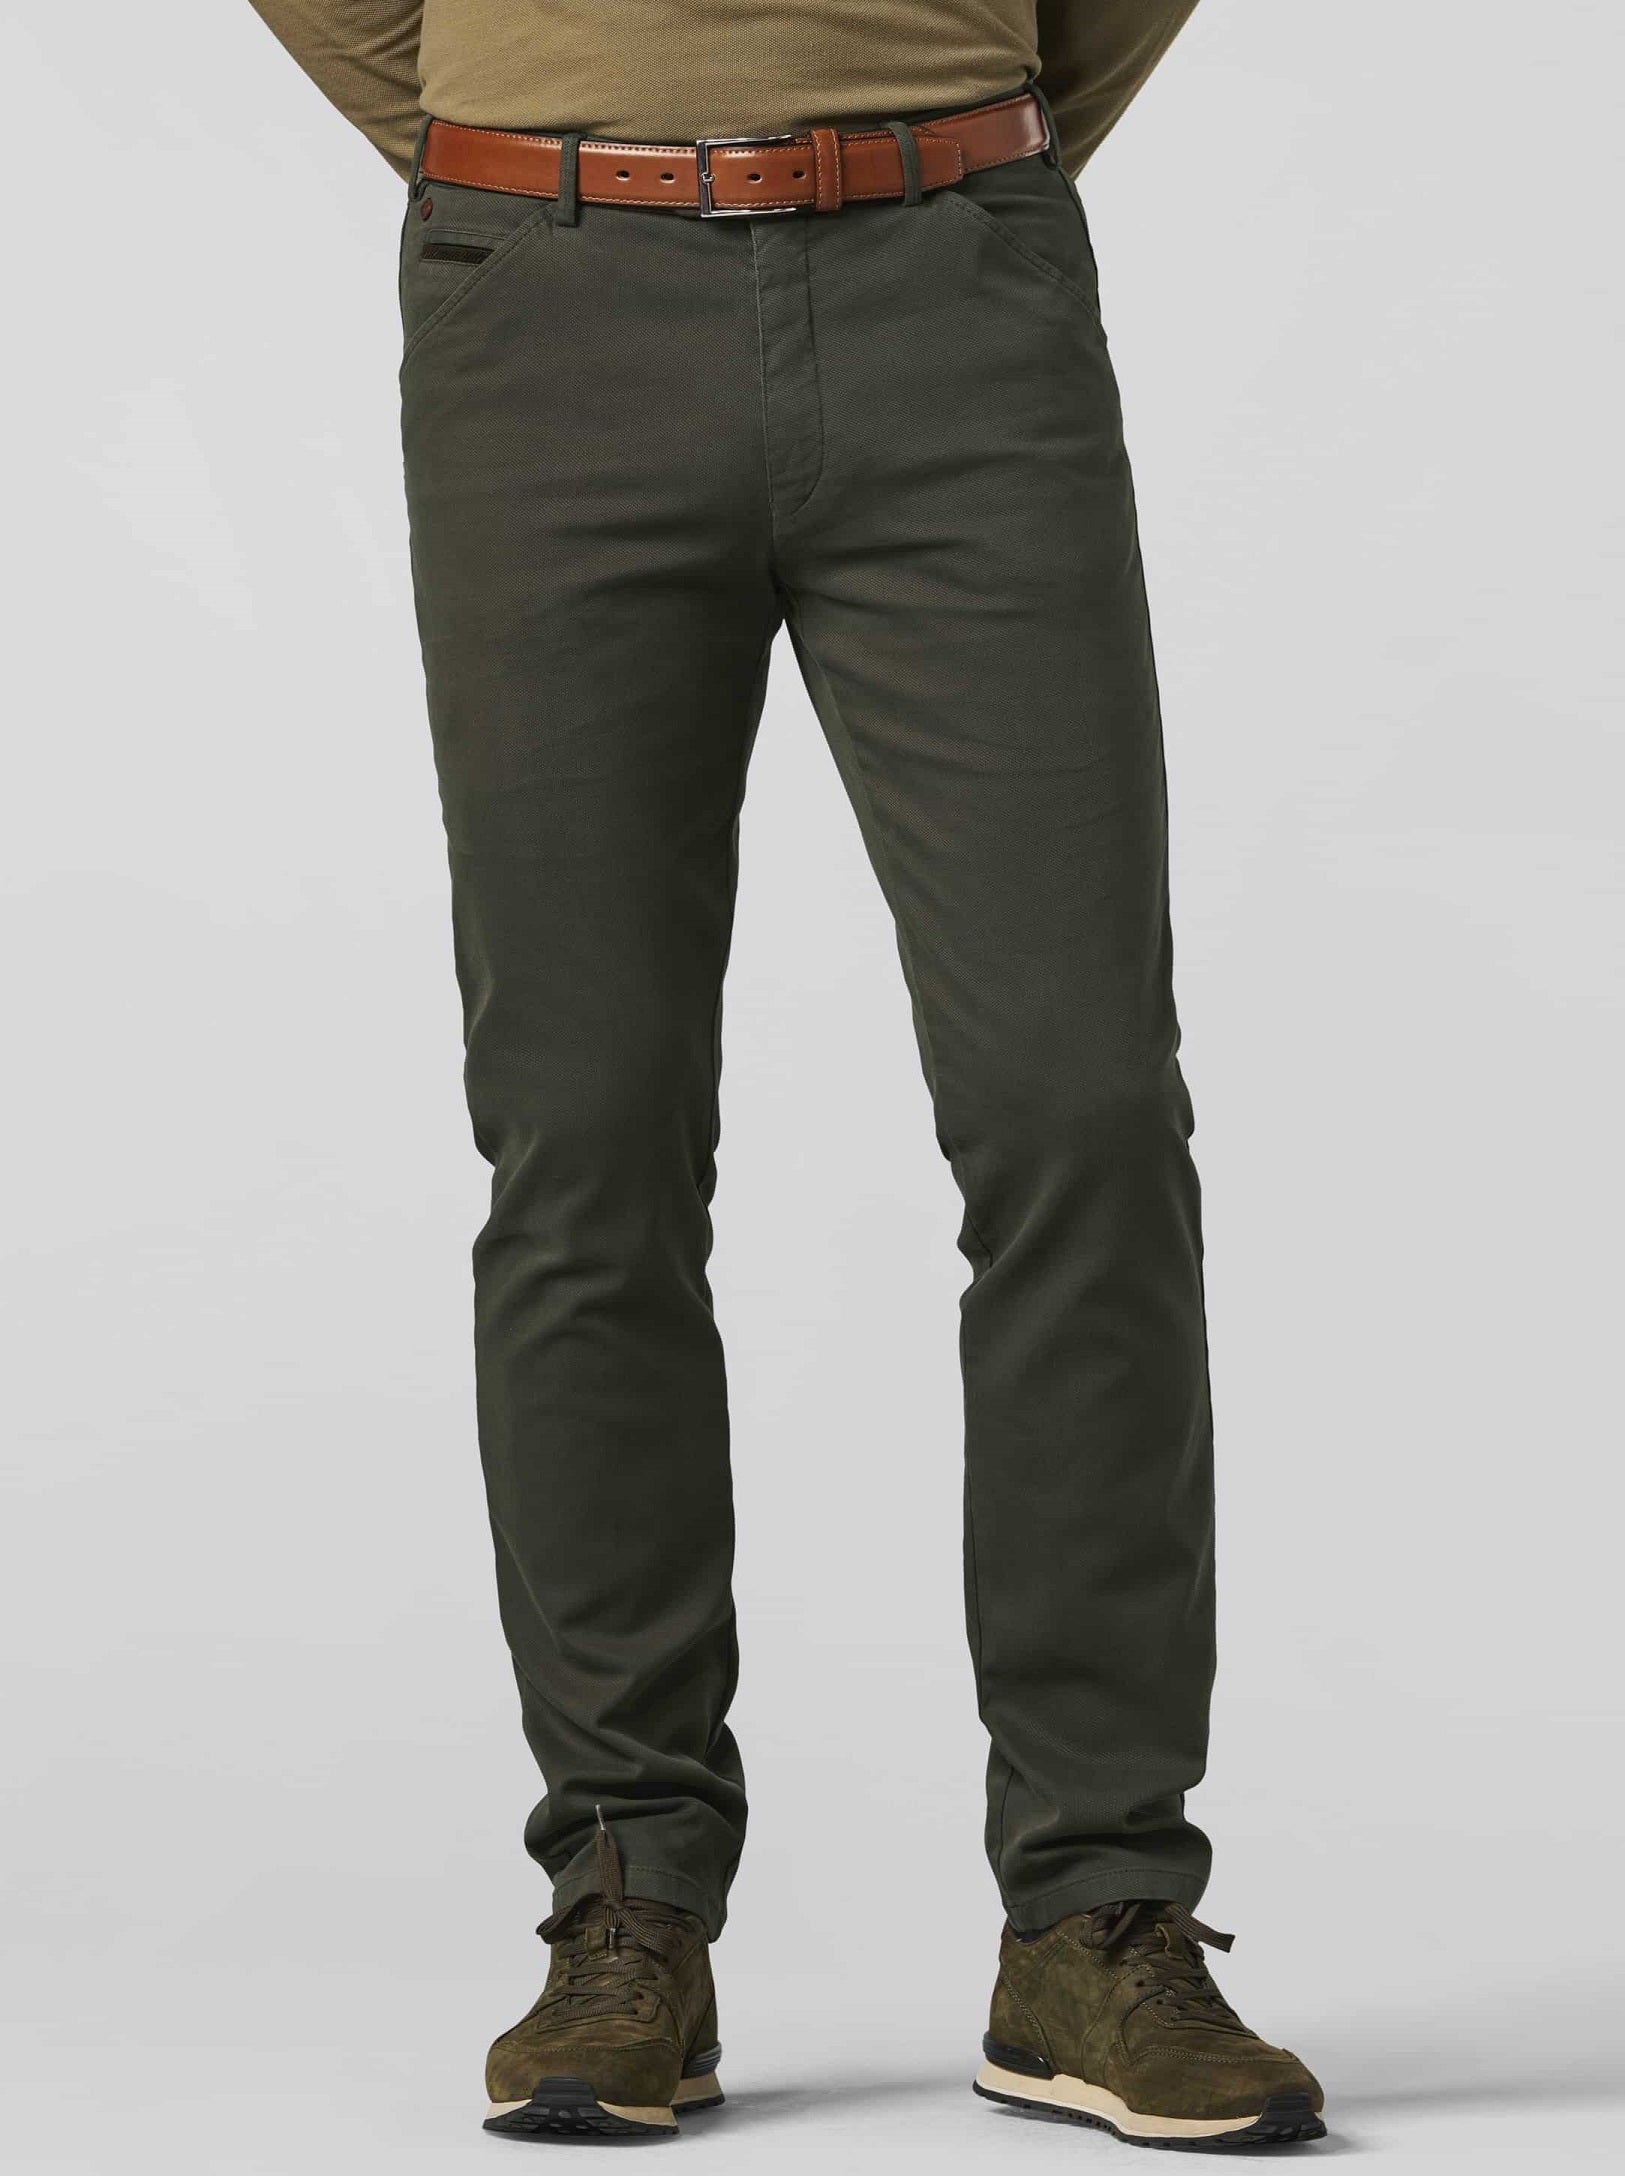 50% OFF - MEYER Trousers - Chicago 5580 Super Stretch Chinos - Green - Sizes: 36 REG